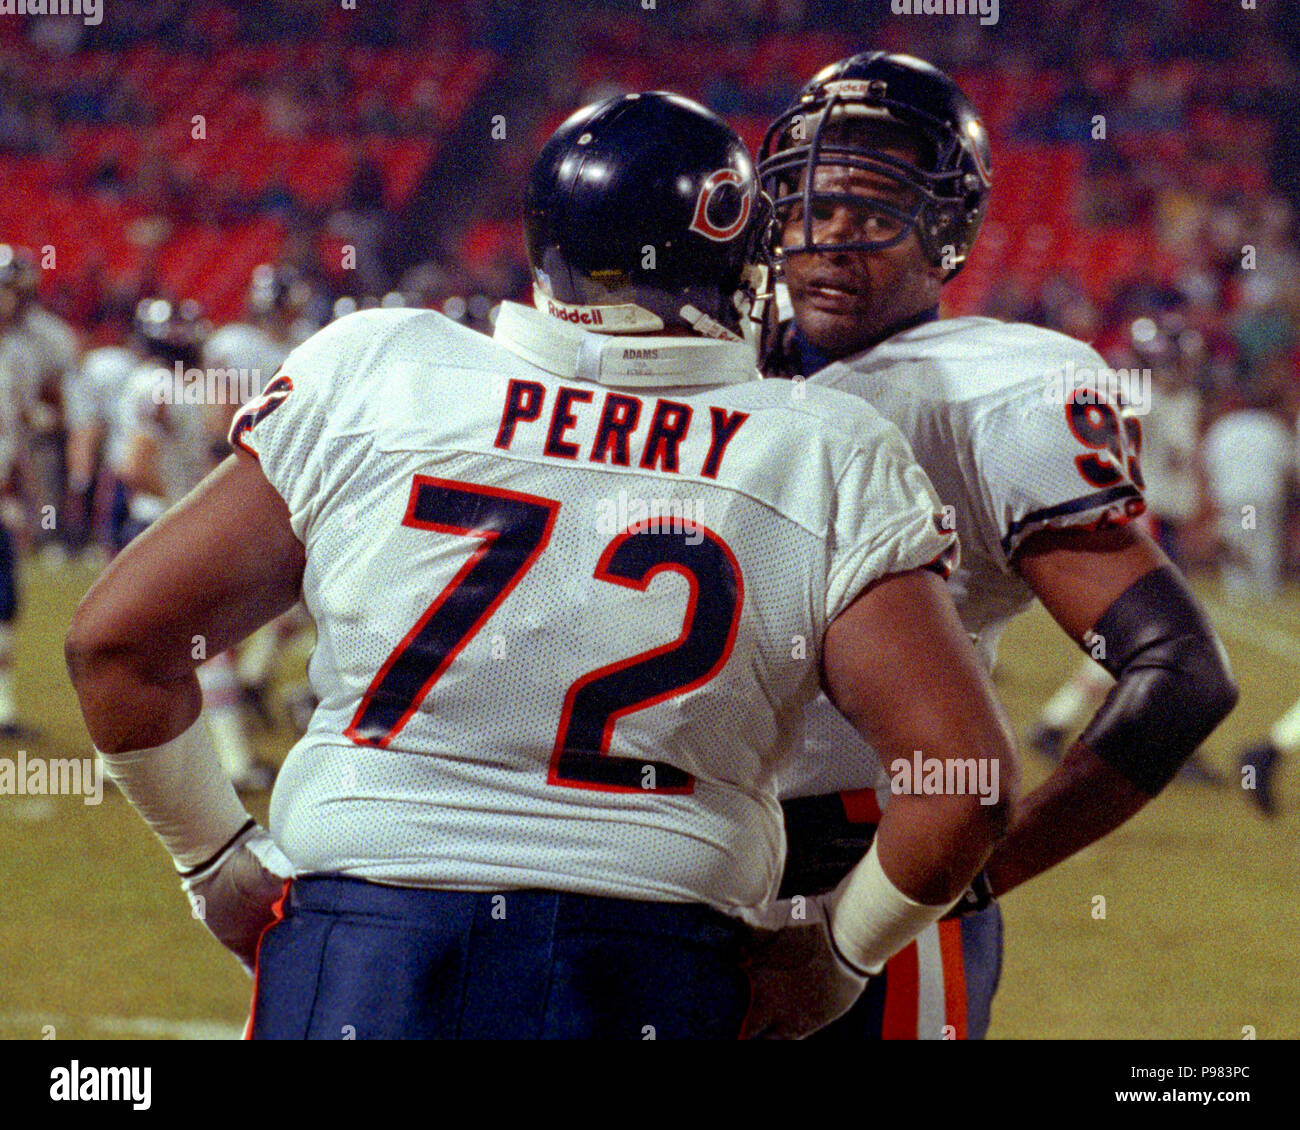 San Francisco, California, USA. 23rd Dec, 1991. San Francisco 49ers vs. Chicago Bears at Candlestick Park Monday, December 23, 1991. 49ers beat Bears 52-14. Bears defensive tackle William Perry (72) and defensive end Richard Dent (95) talk on sidelines. Credit: Al Golub/ZUMA Wire/Alamy Live News Stock Photo